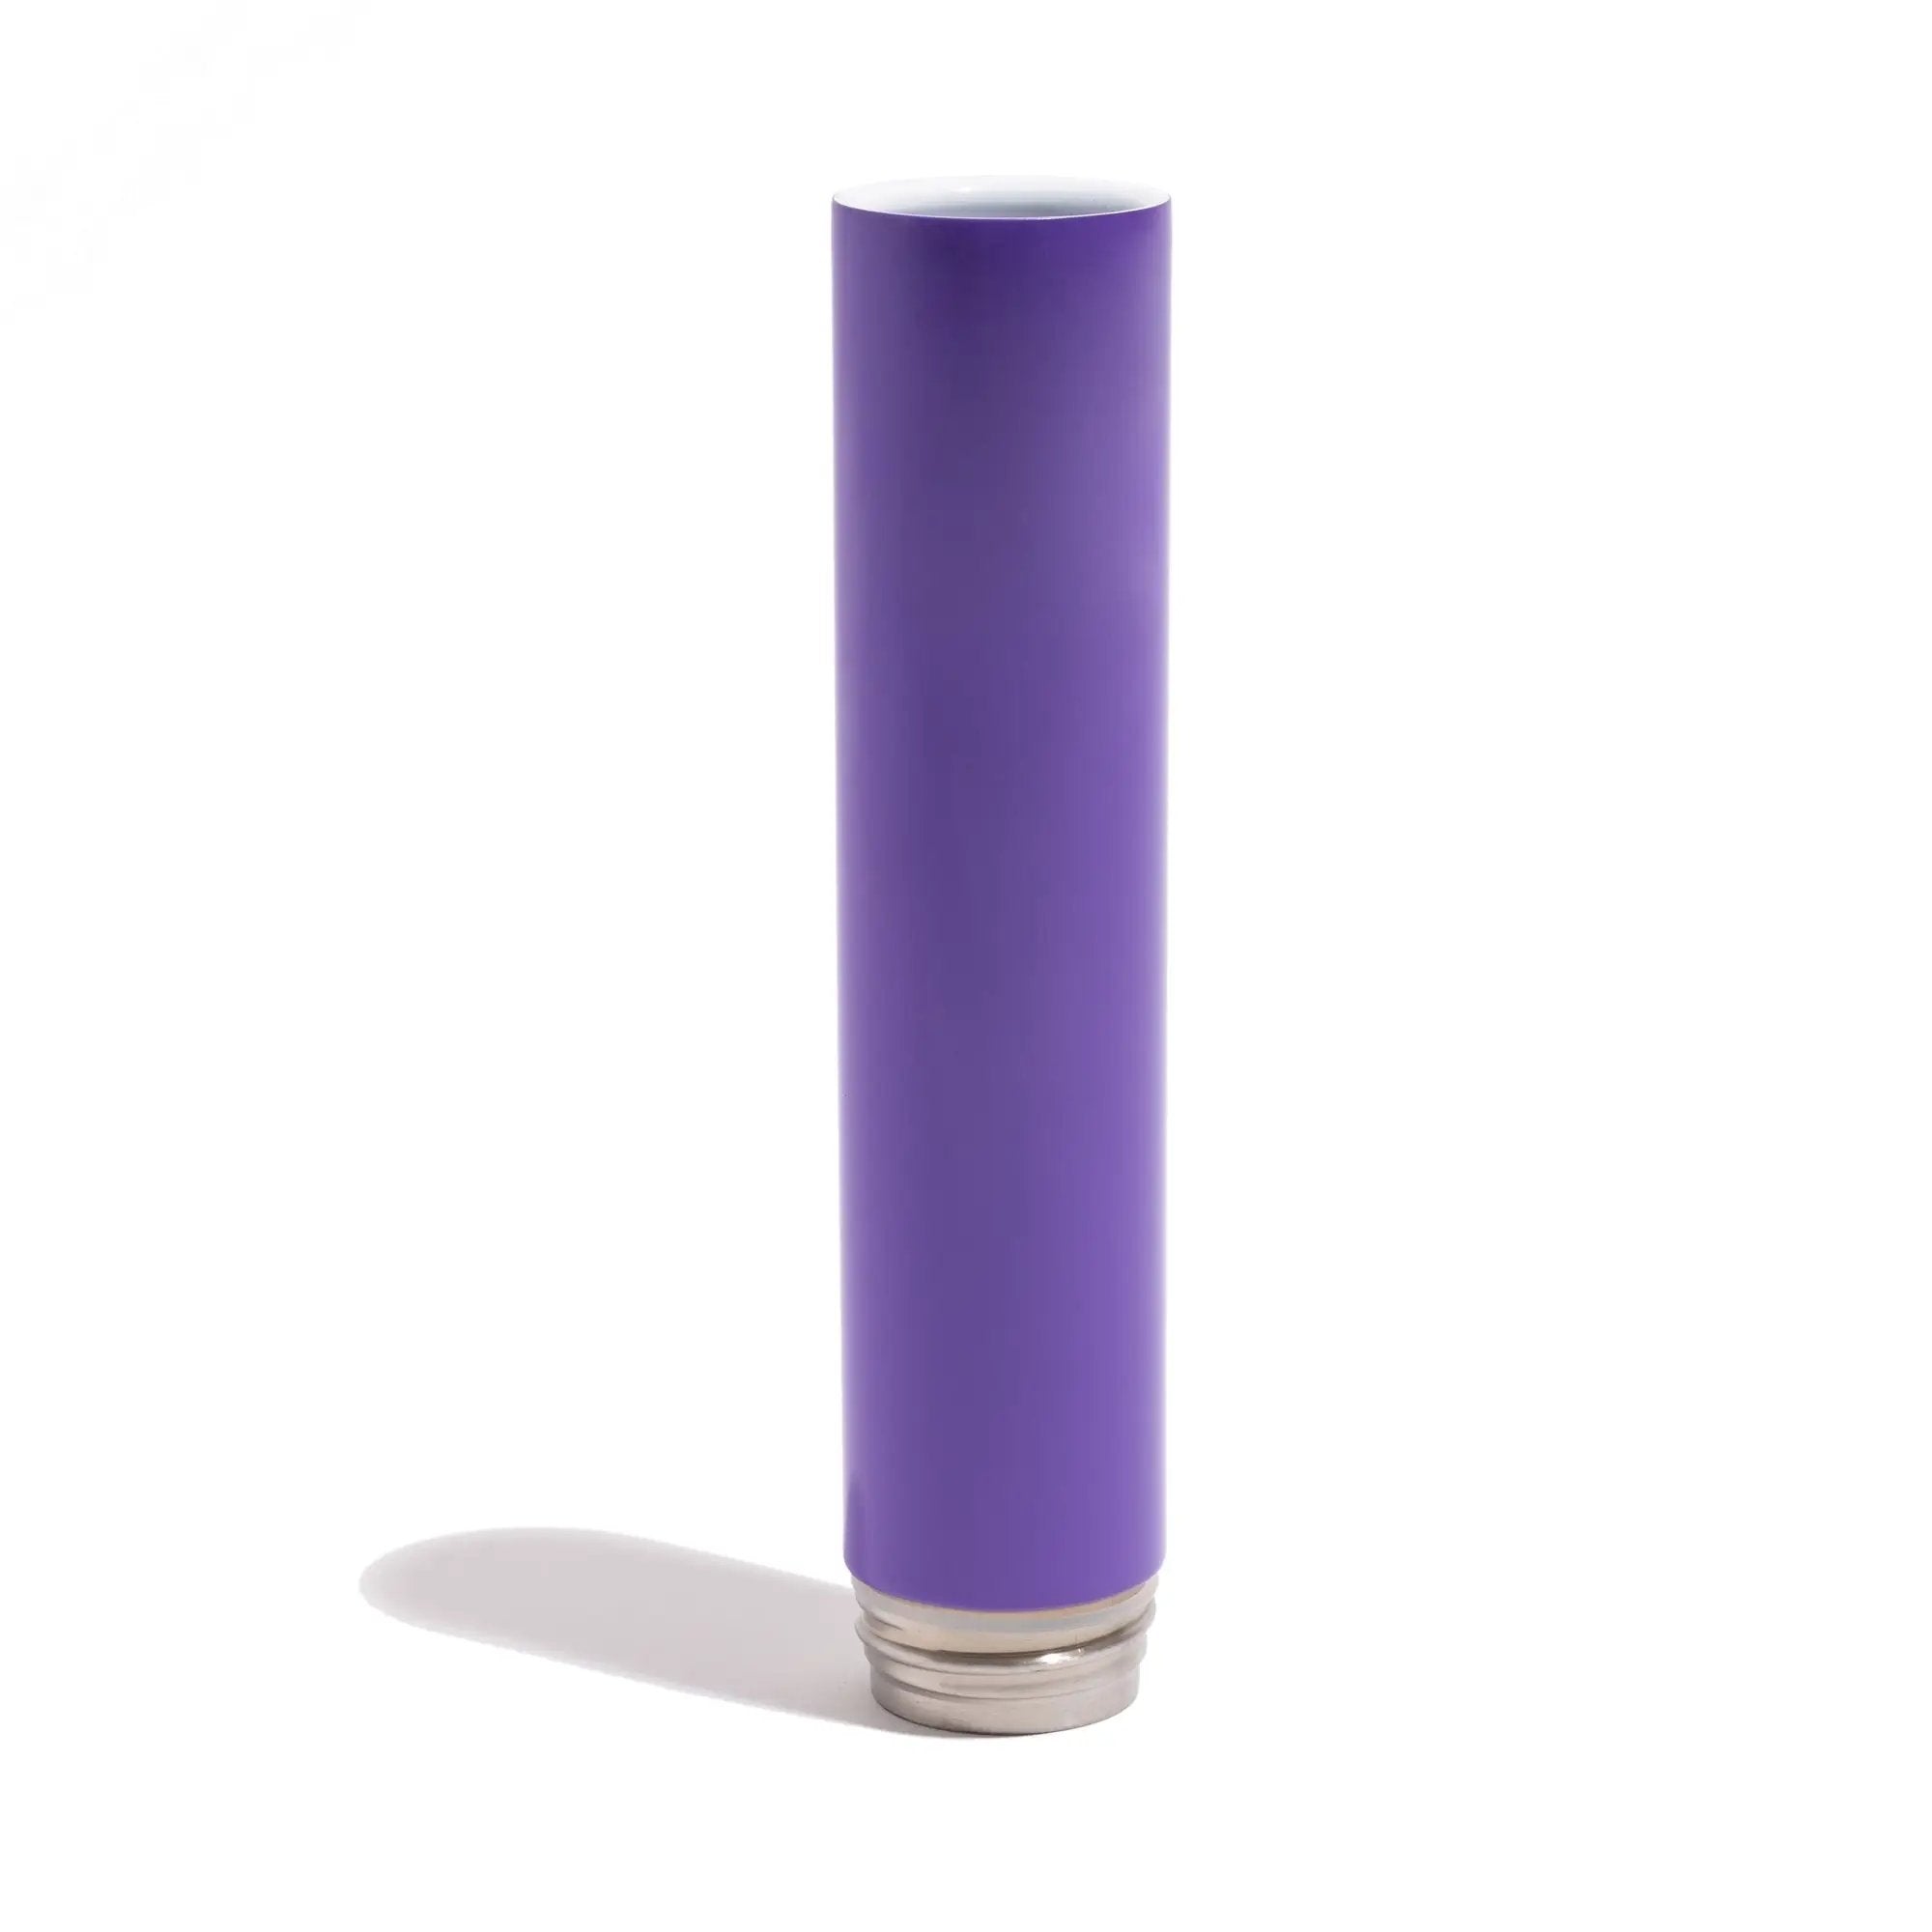 Chill - Mix & Match Series - Neon Purple Gloss by Chill Steel Pipes